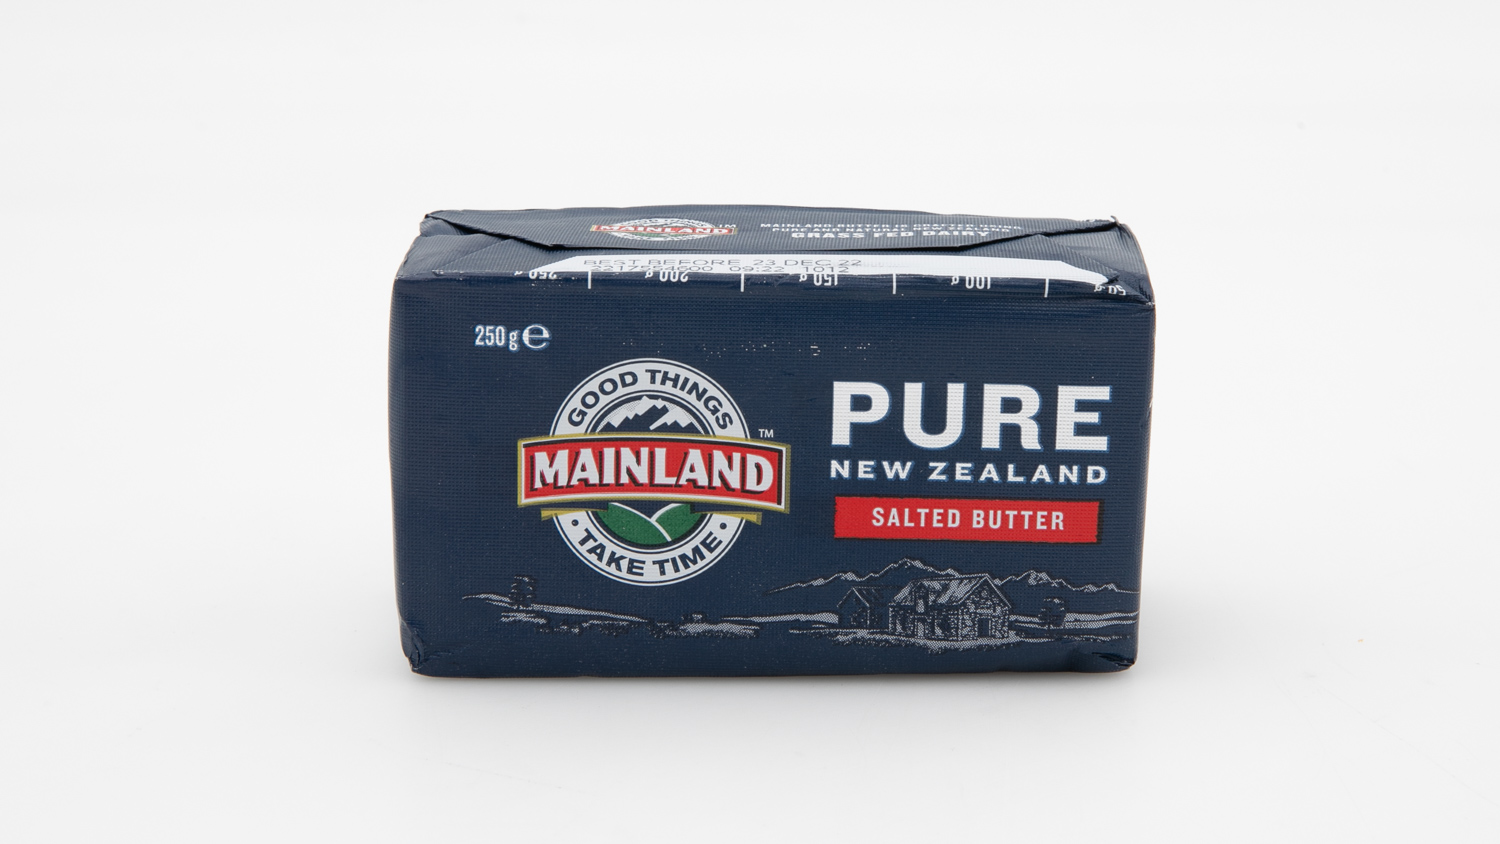 Mainland Pure New Zealand Salted Butter carousel image